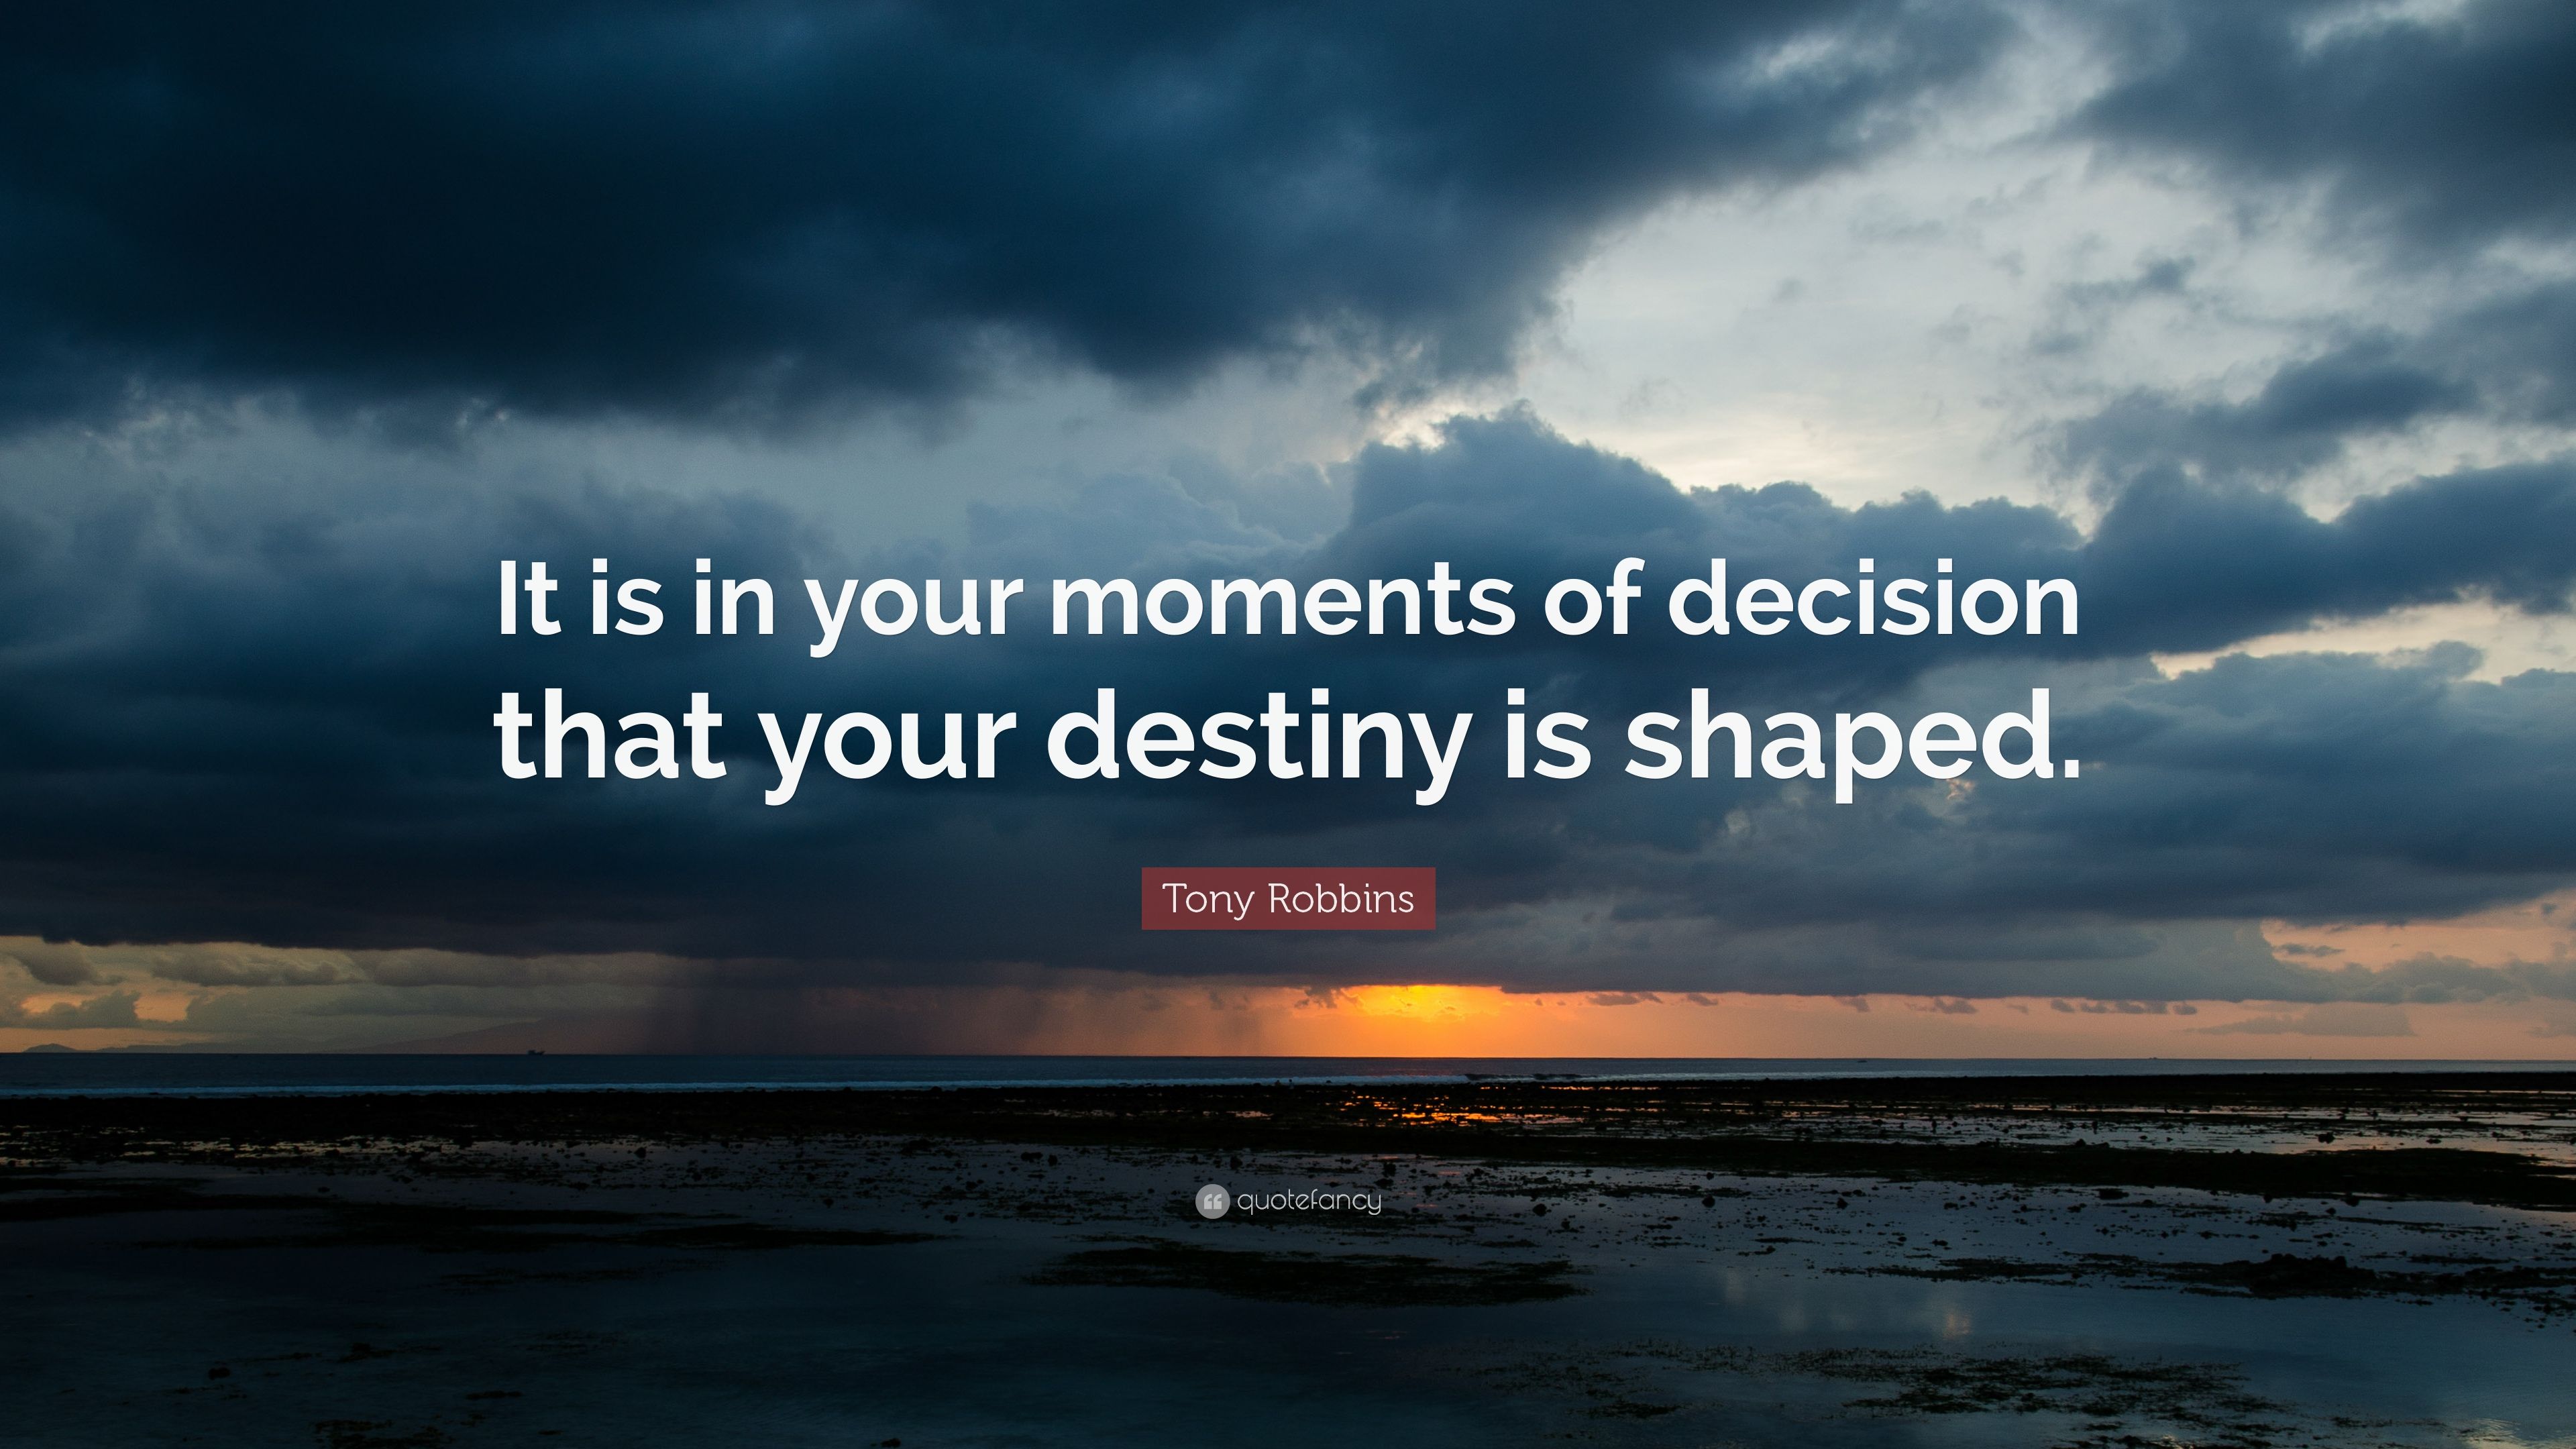 Tony Robbins Quote: “It is in your moments of decision that your